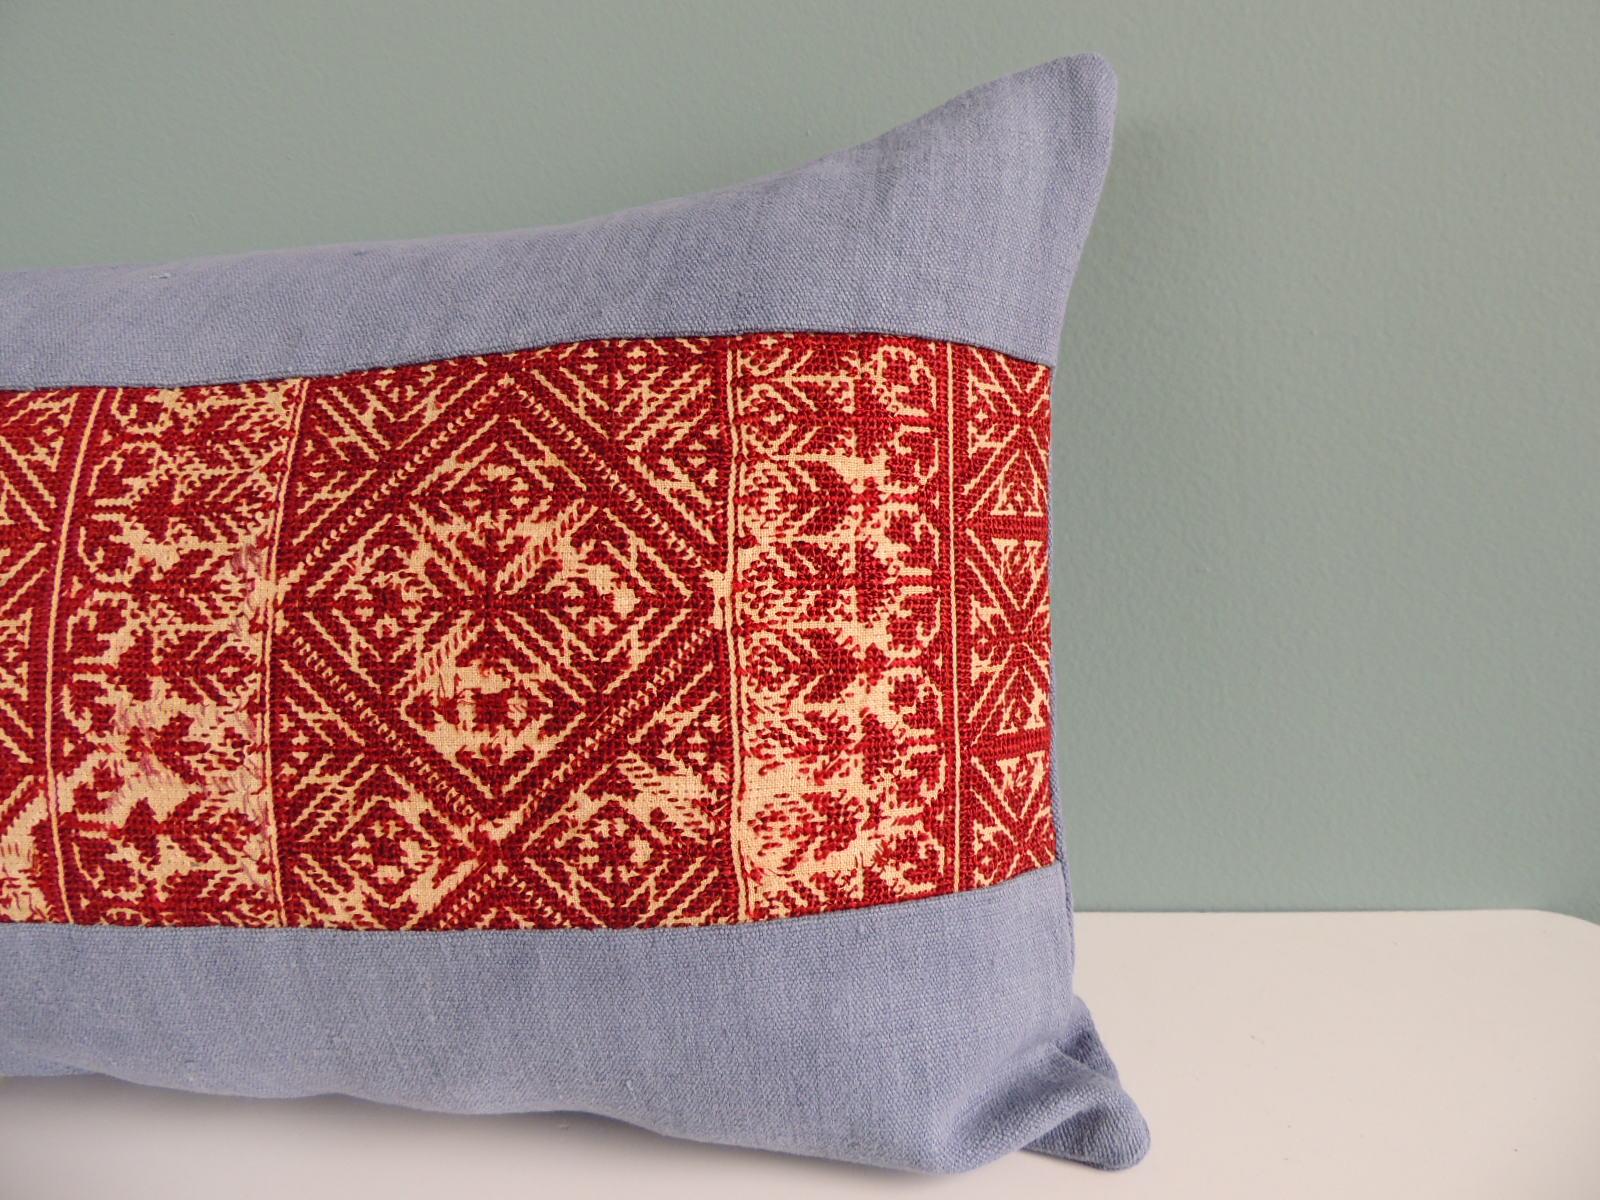 Moroccan Antique Burnt Orange Embroidered Fez Decorative Long Bolster Pillow